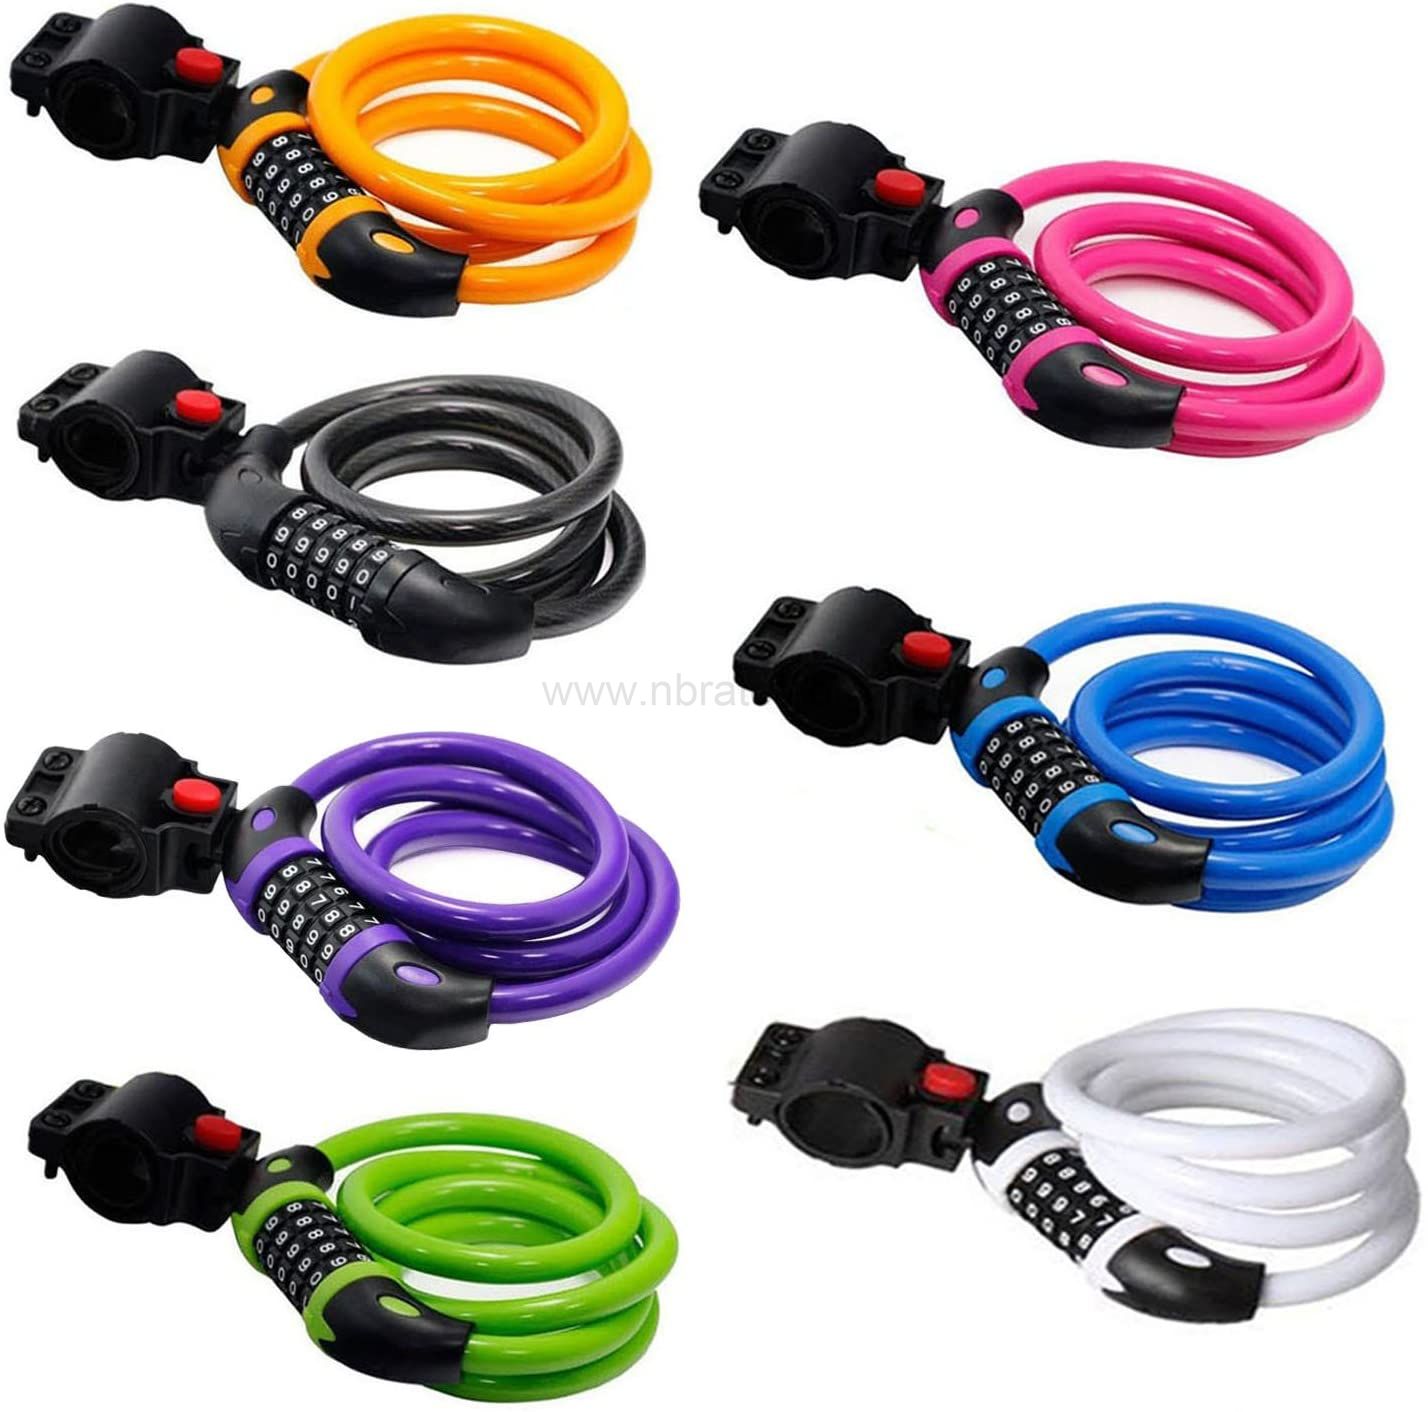 Bike Lock Security 5 Digit Resettable Combination Coiling bicycle Cable Lock